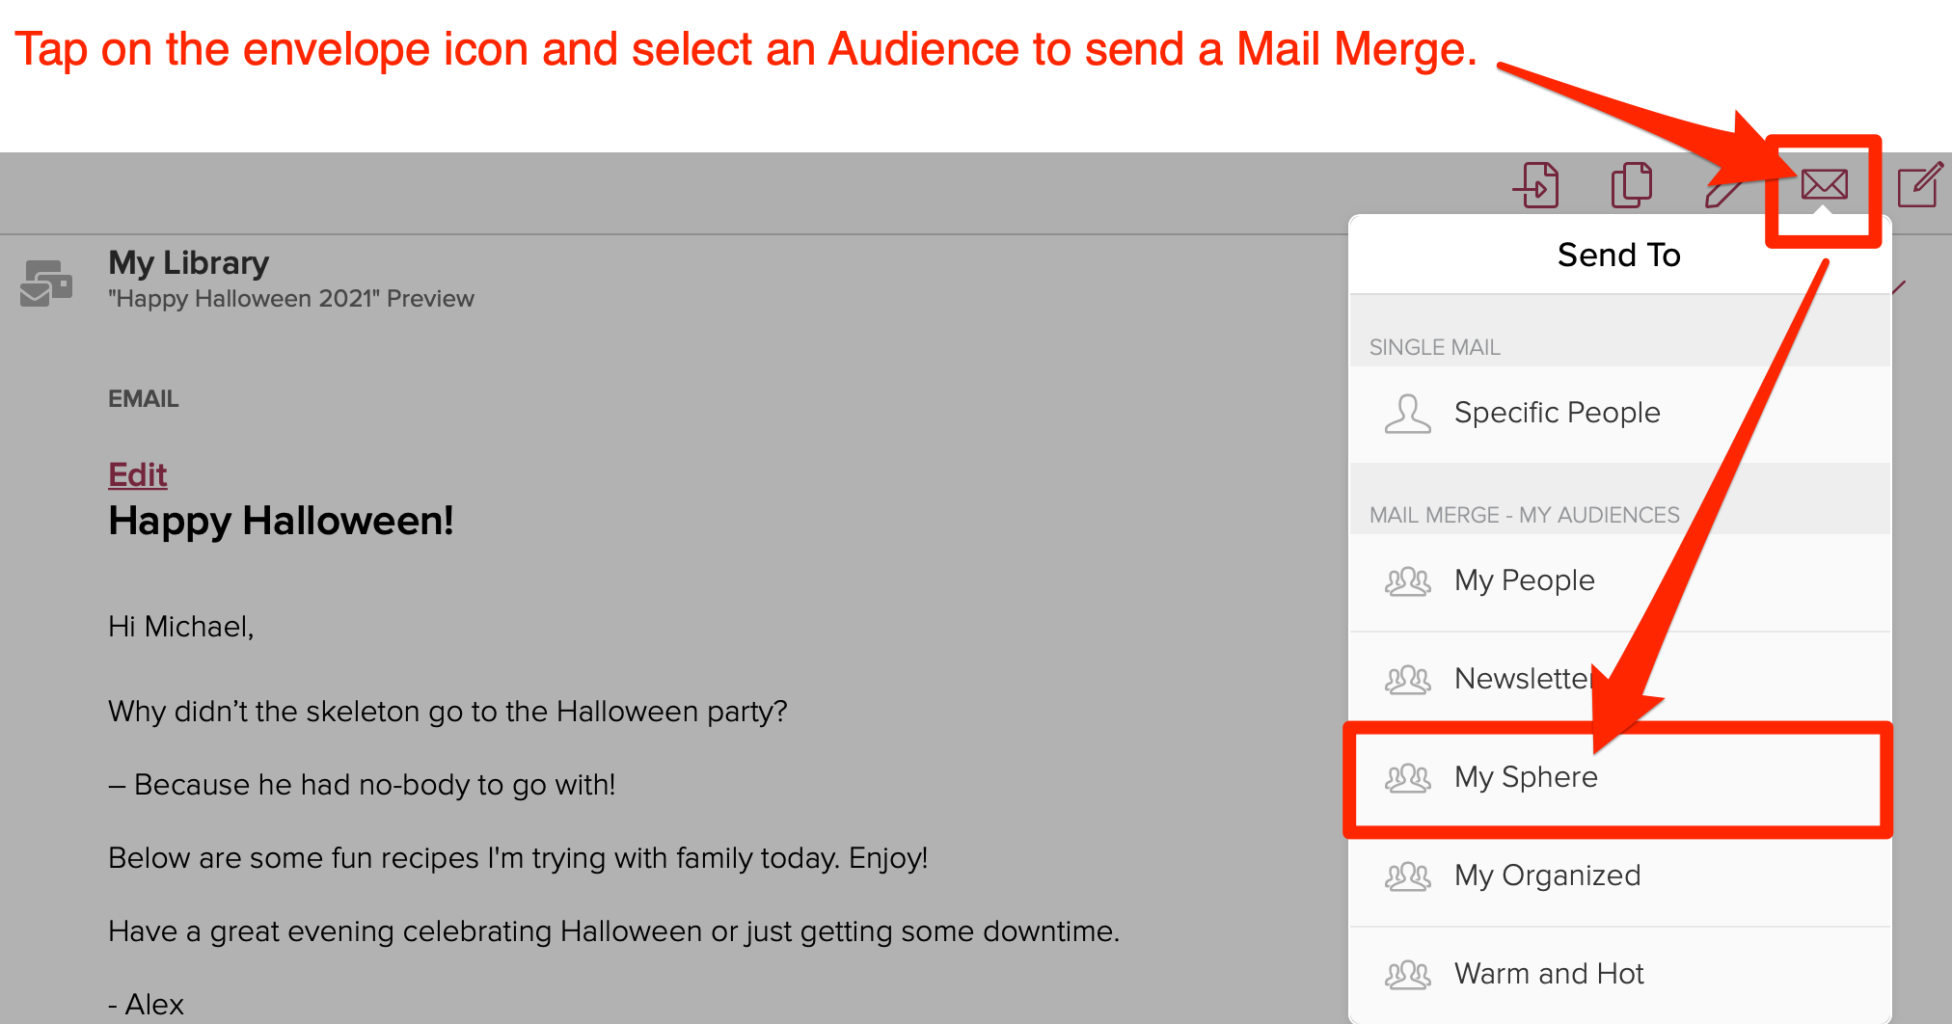 Send a Cloze mail merge to an audience from a template. 